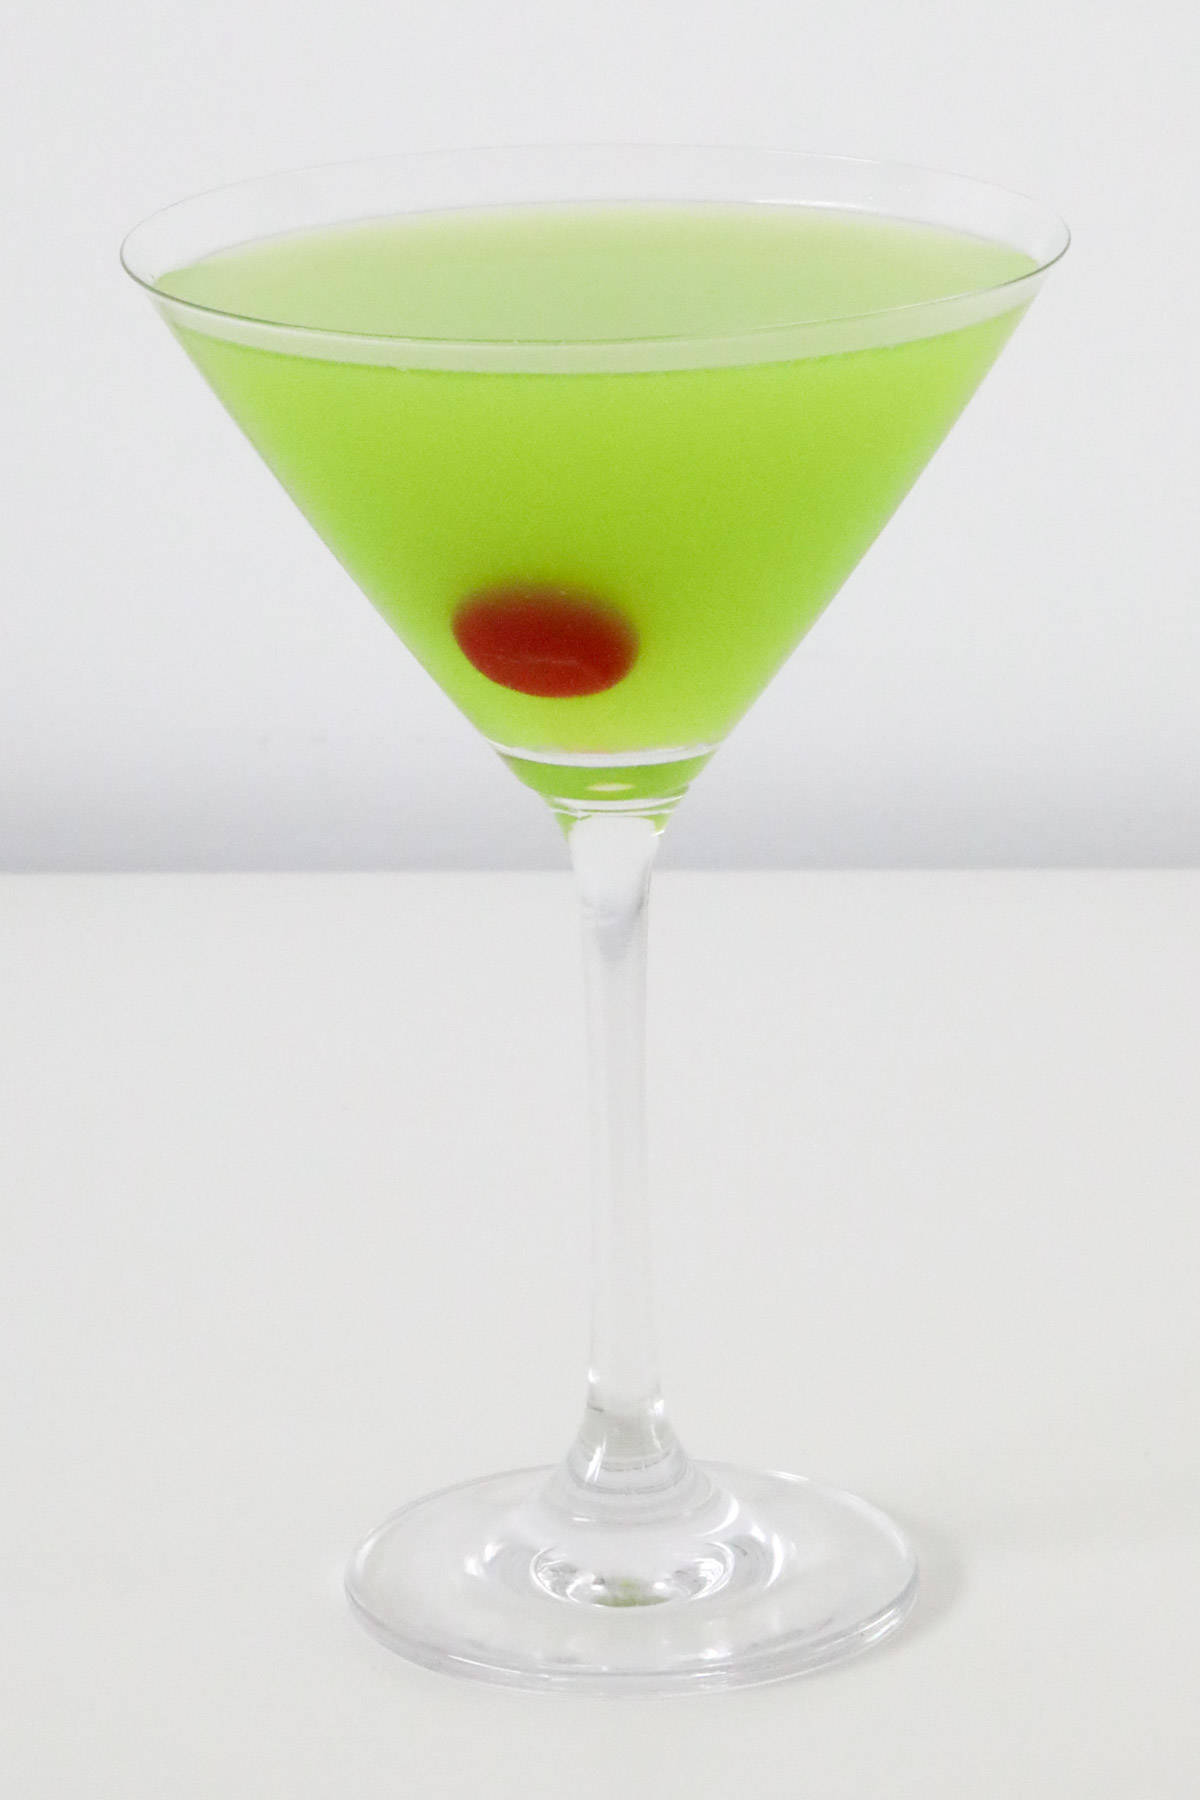 A martini glass filled with a lime green Japanese slipper cocktail and a maraschino cherry.